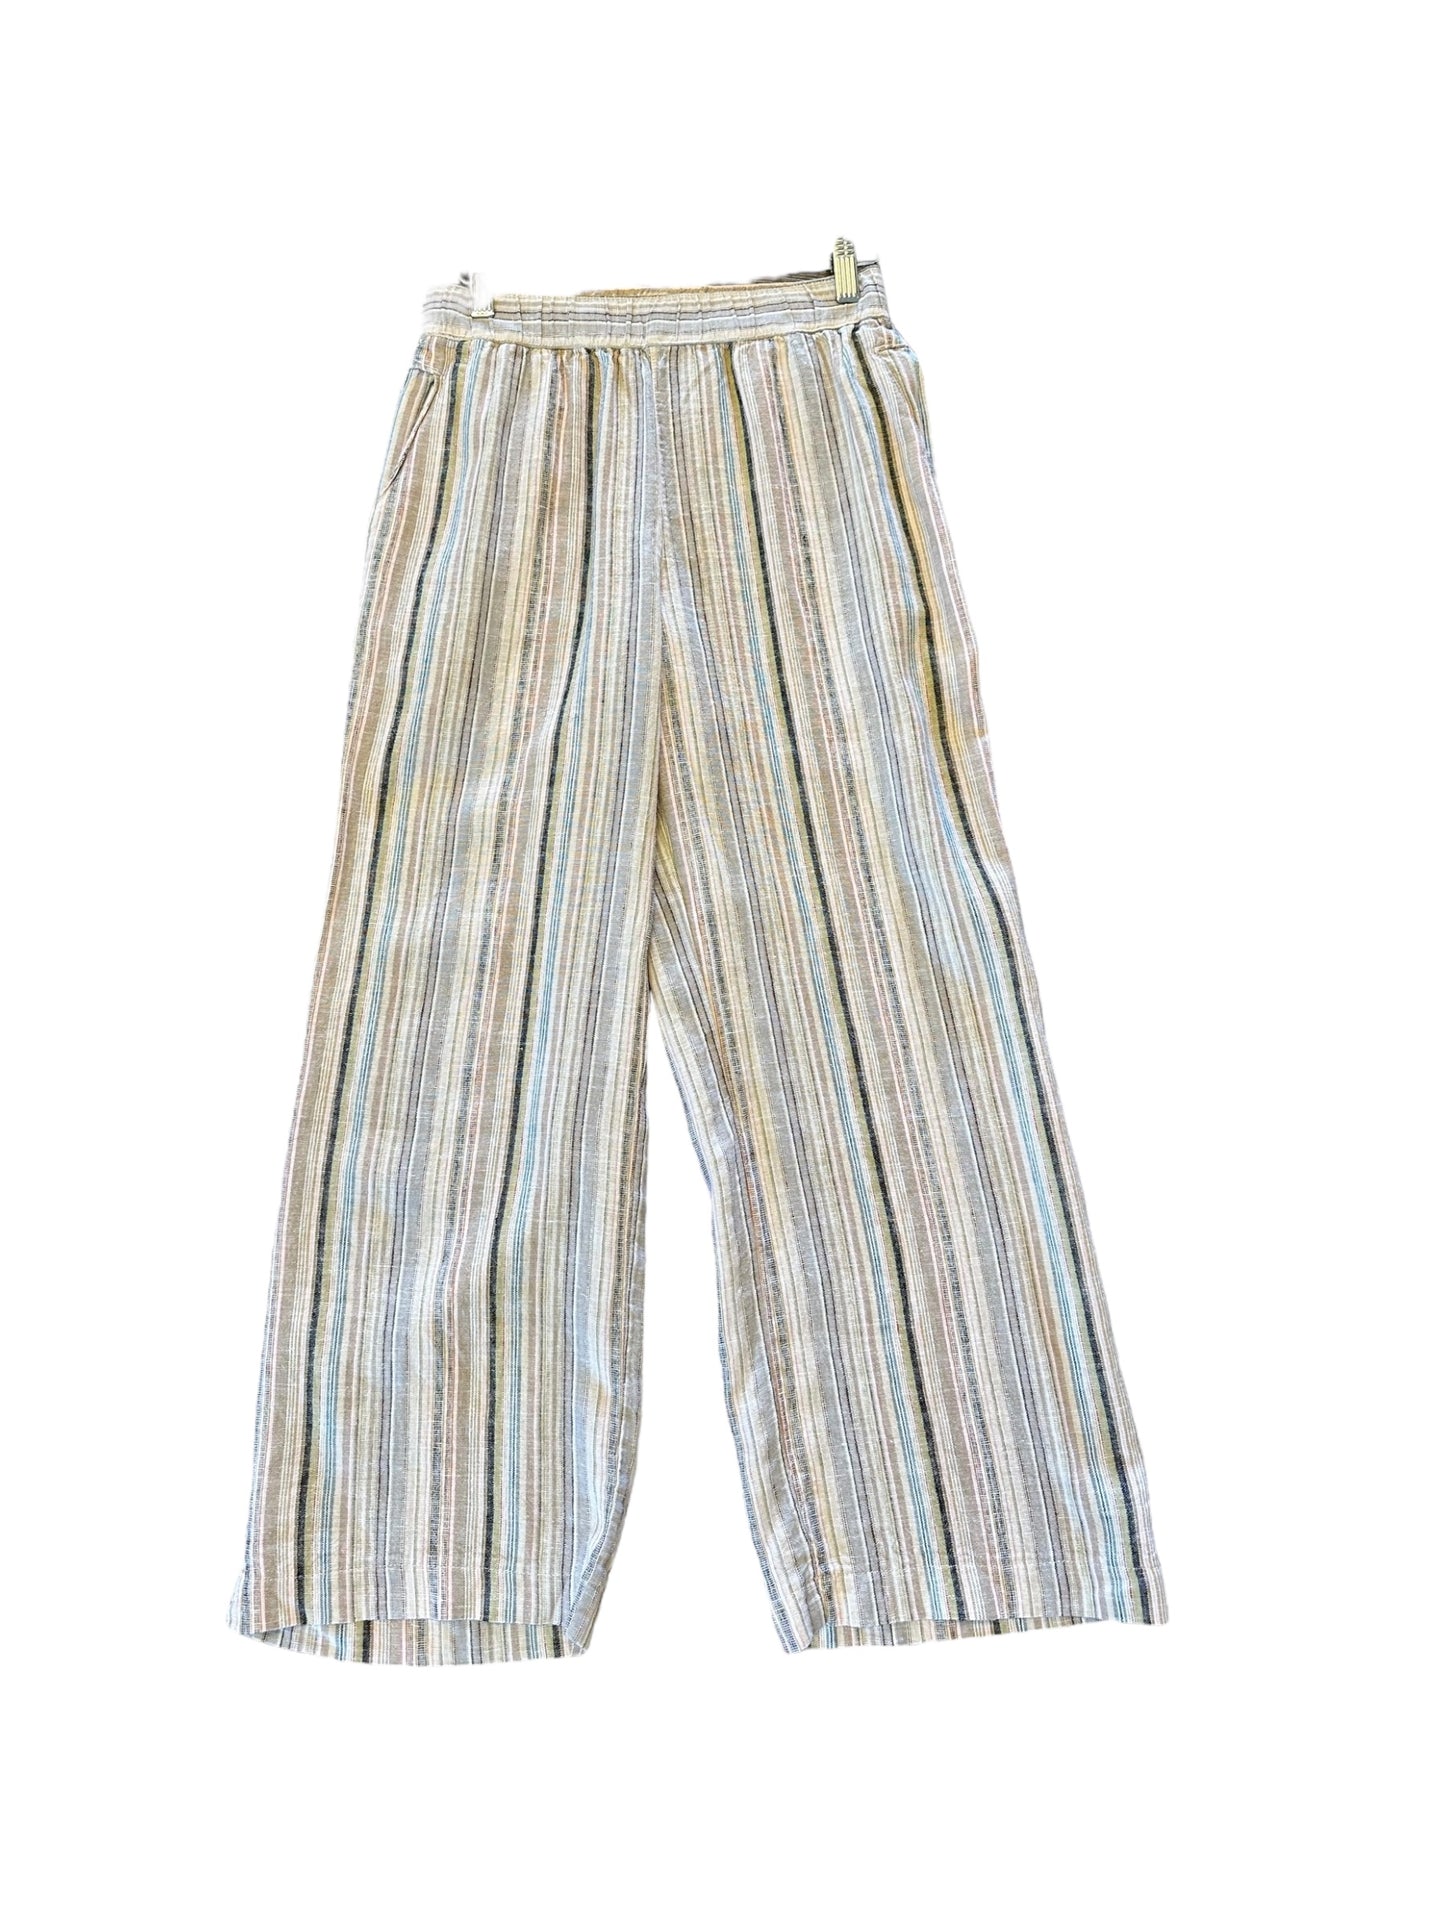 Coast Pant in multi by Dylan